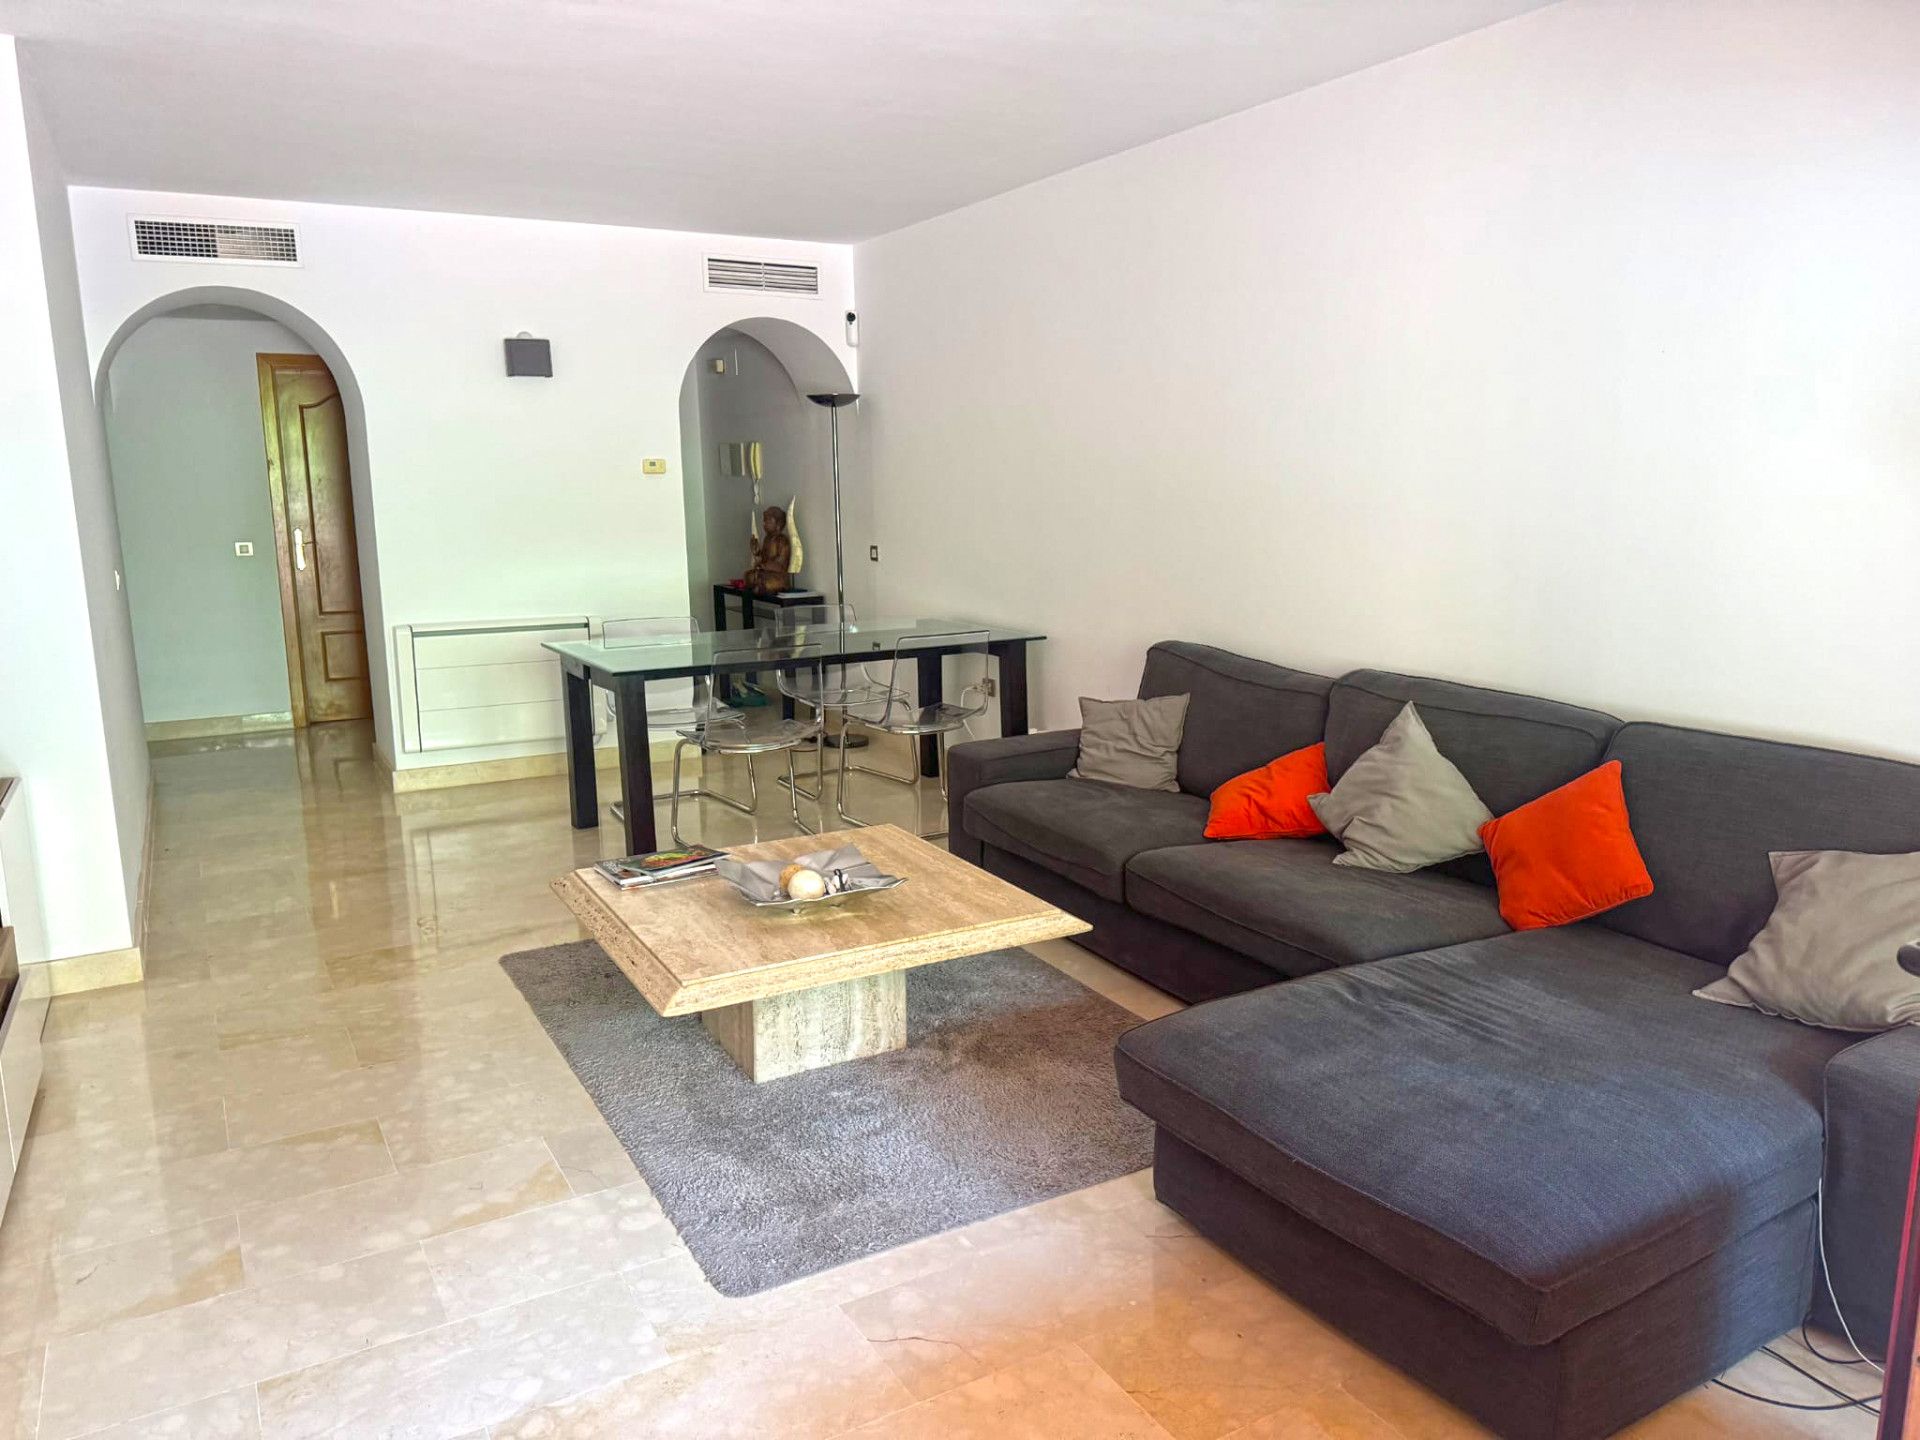 Lovely two bedroom, south west facing ground floor apartment in the gated community Jardines de Albaicín, Benahavis